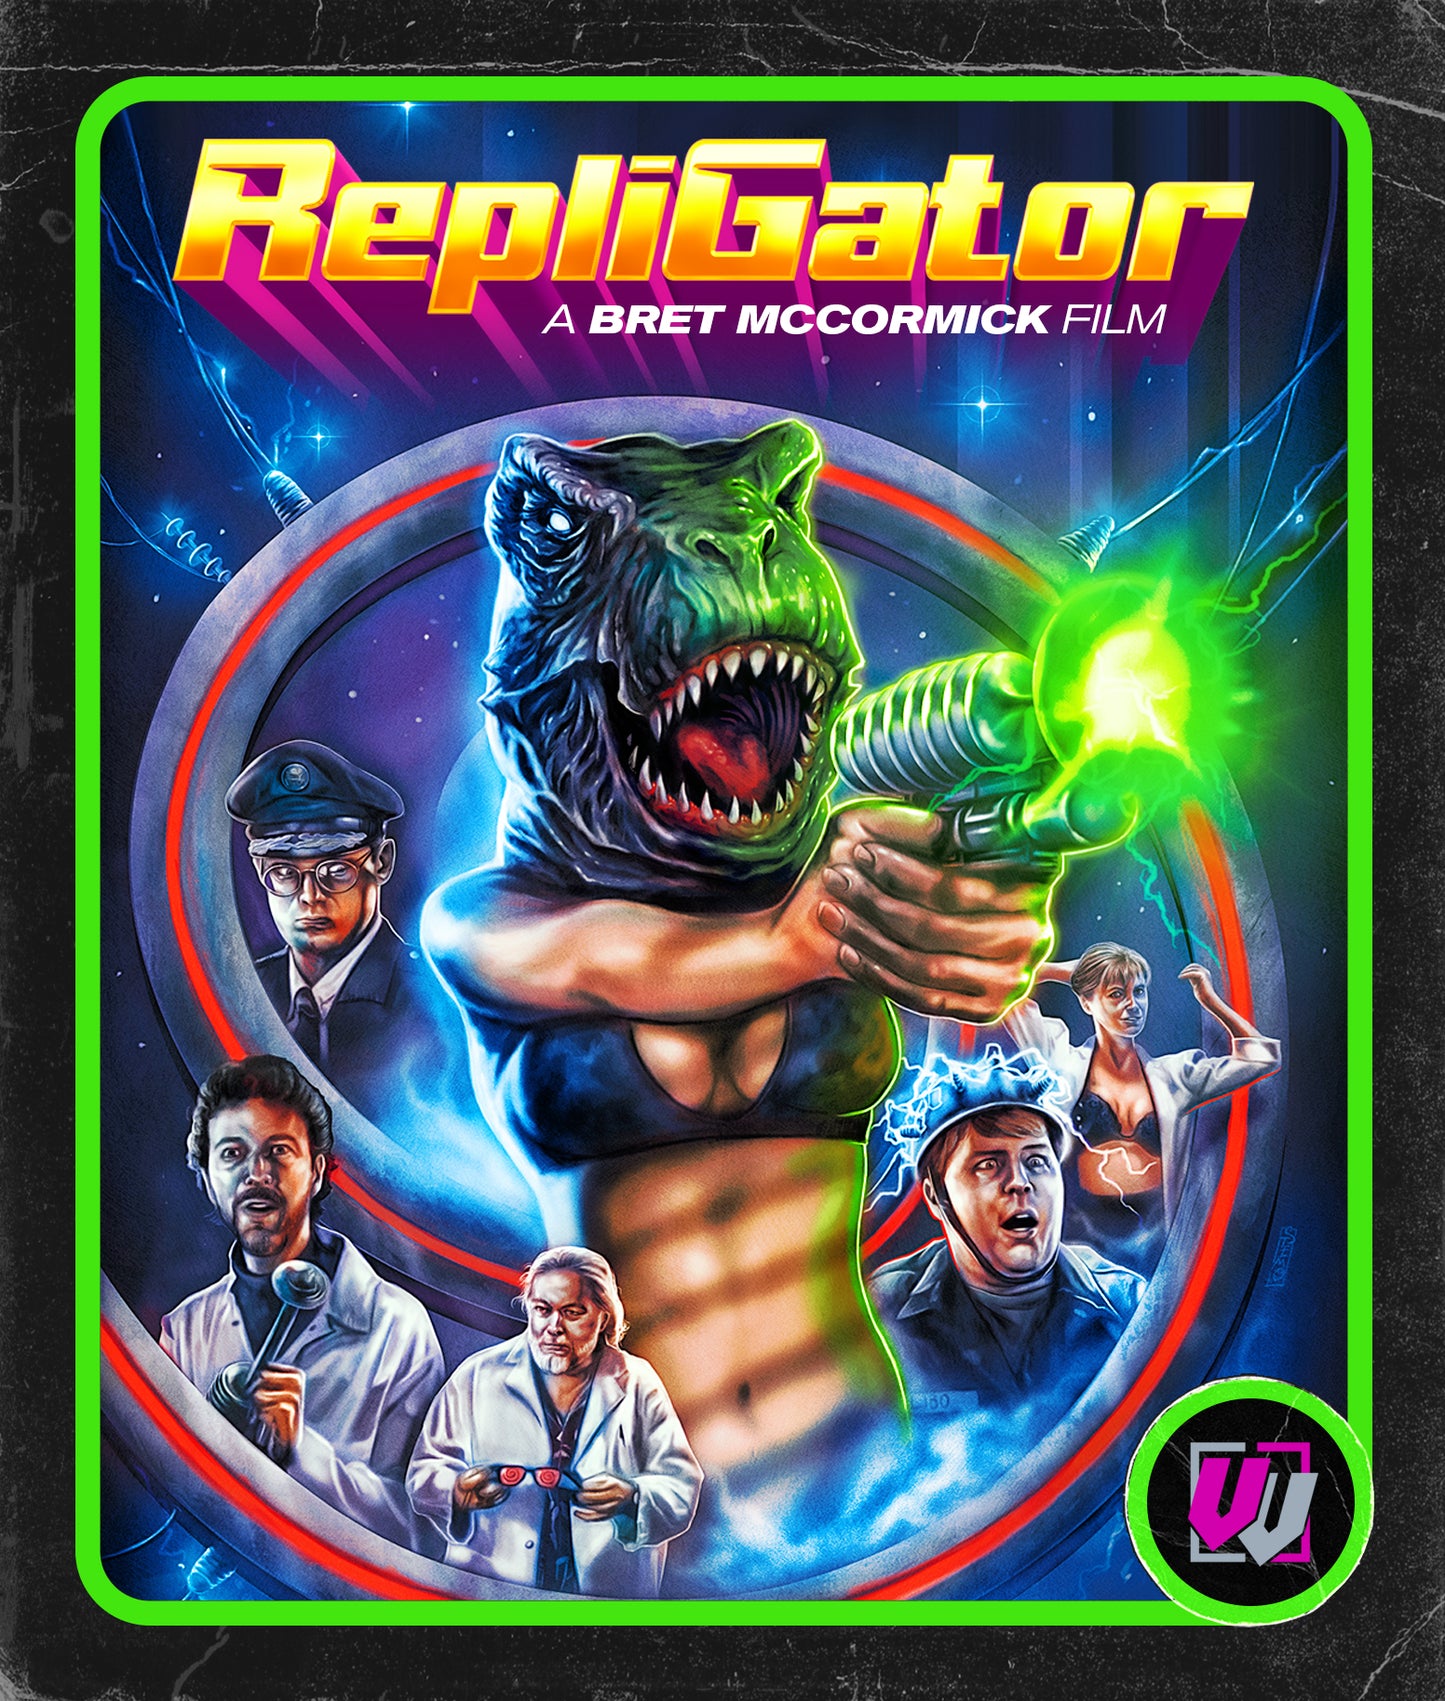 Repligator Collector's Edition Blu-ray with Slipcover (Visual Vengeance)